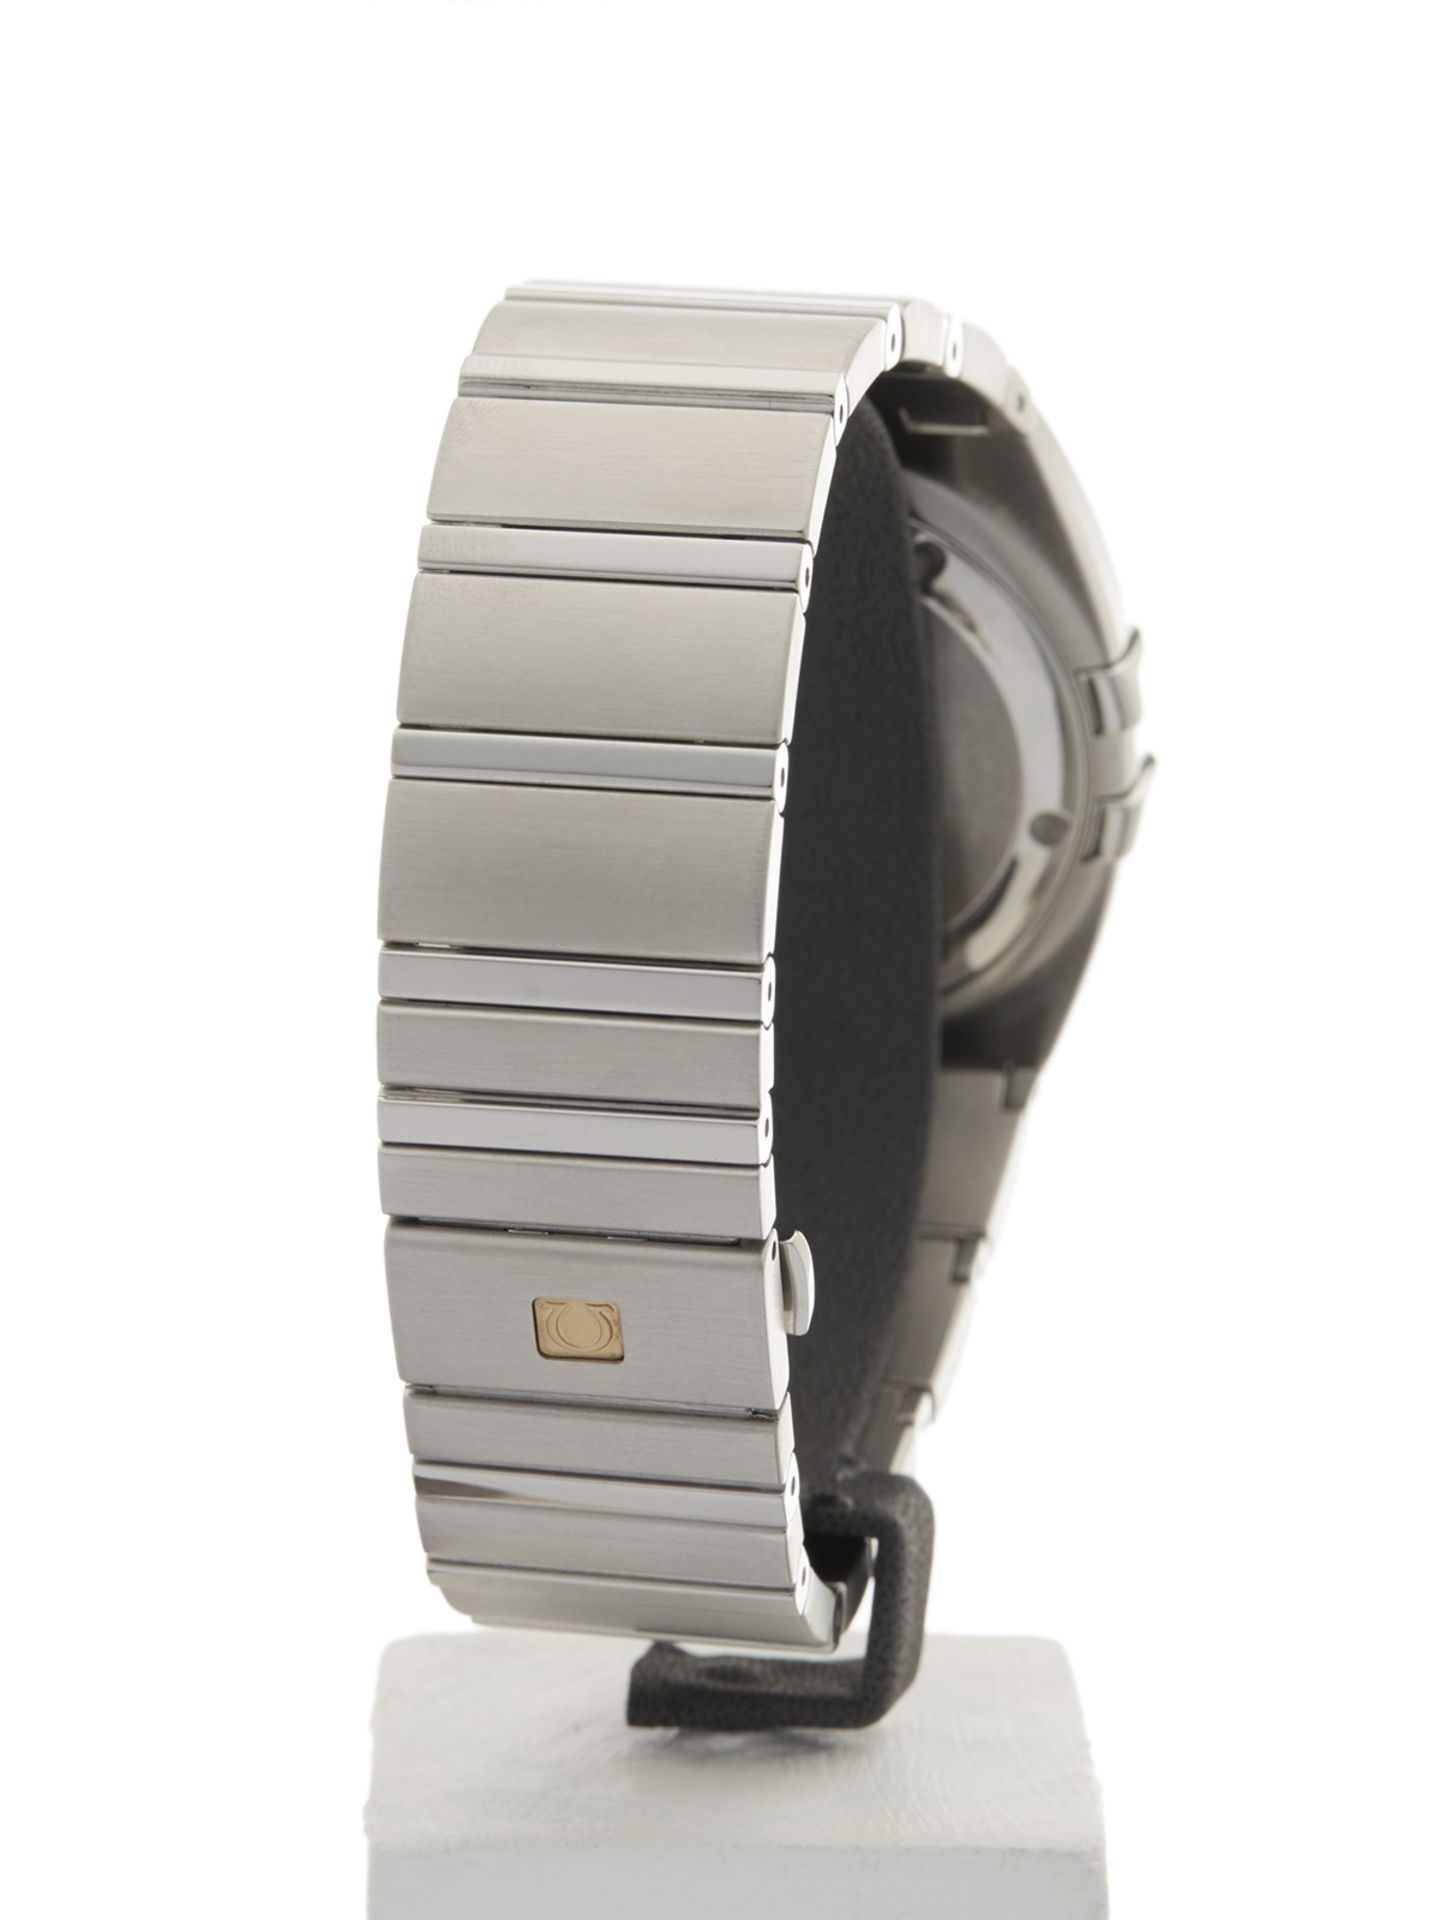 Omega Constellation Double Eagle 40mm Stainless Steel 1513.51.00 - Image 8 of 10